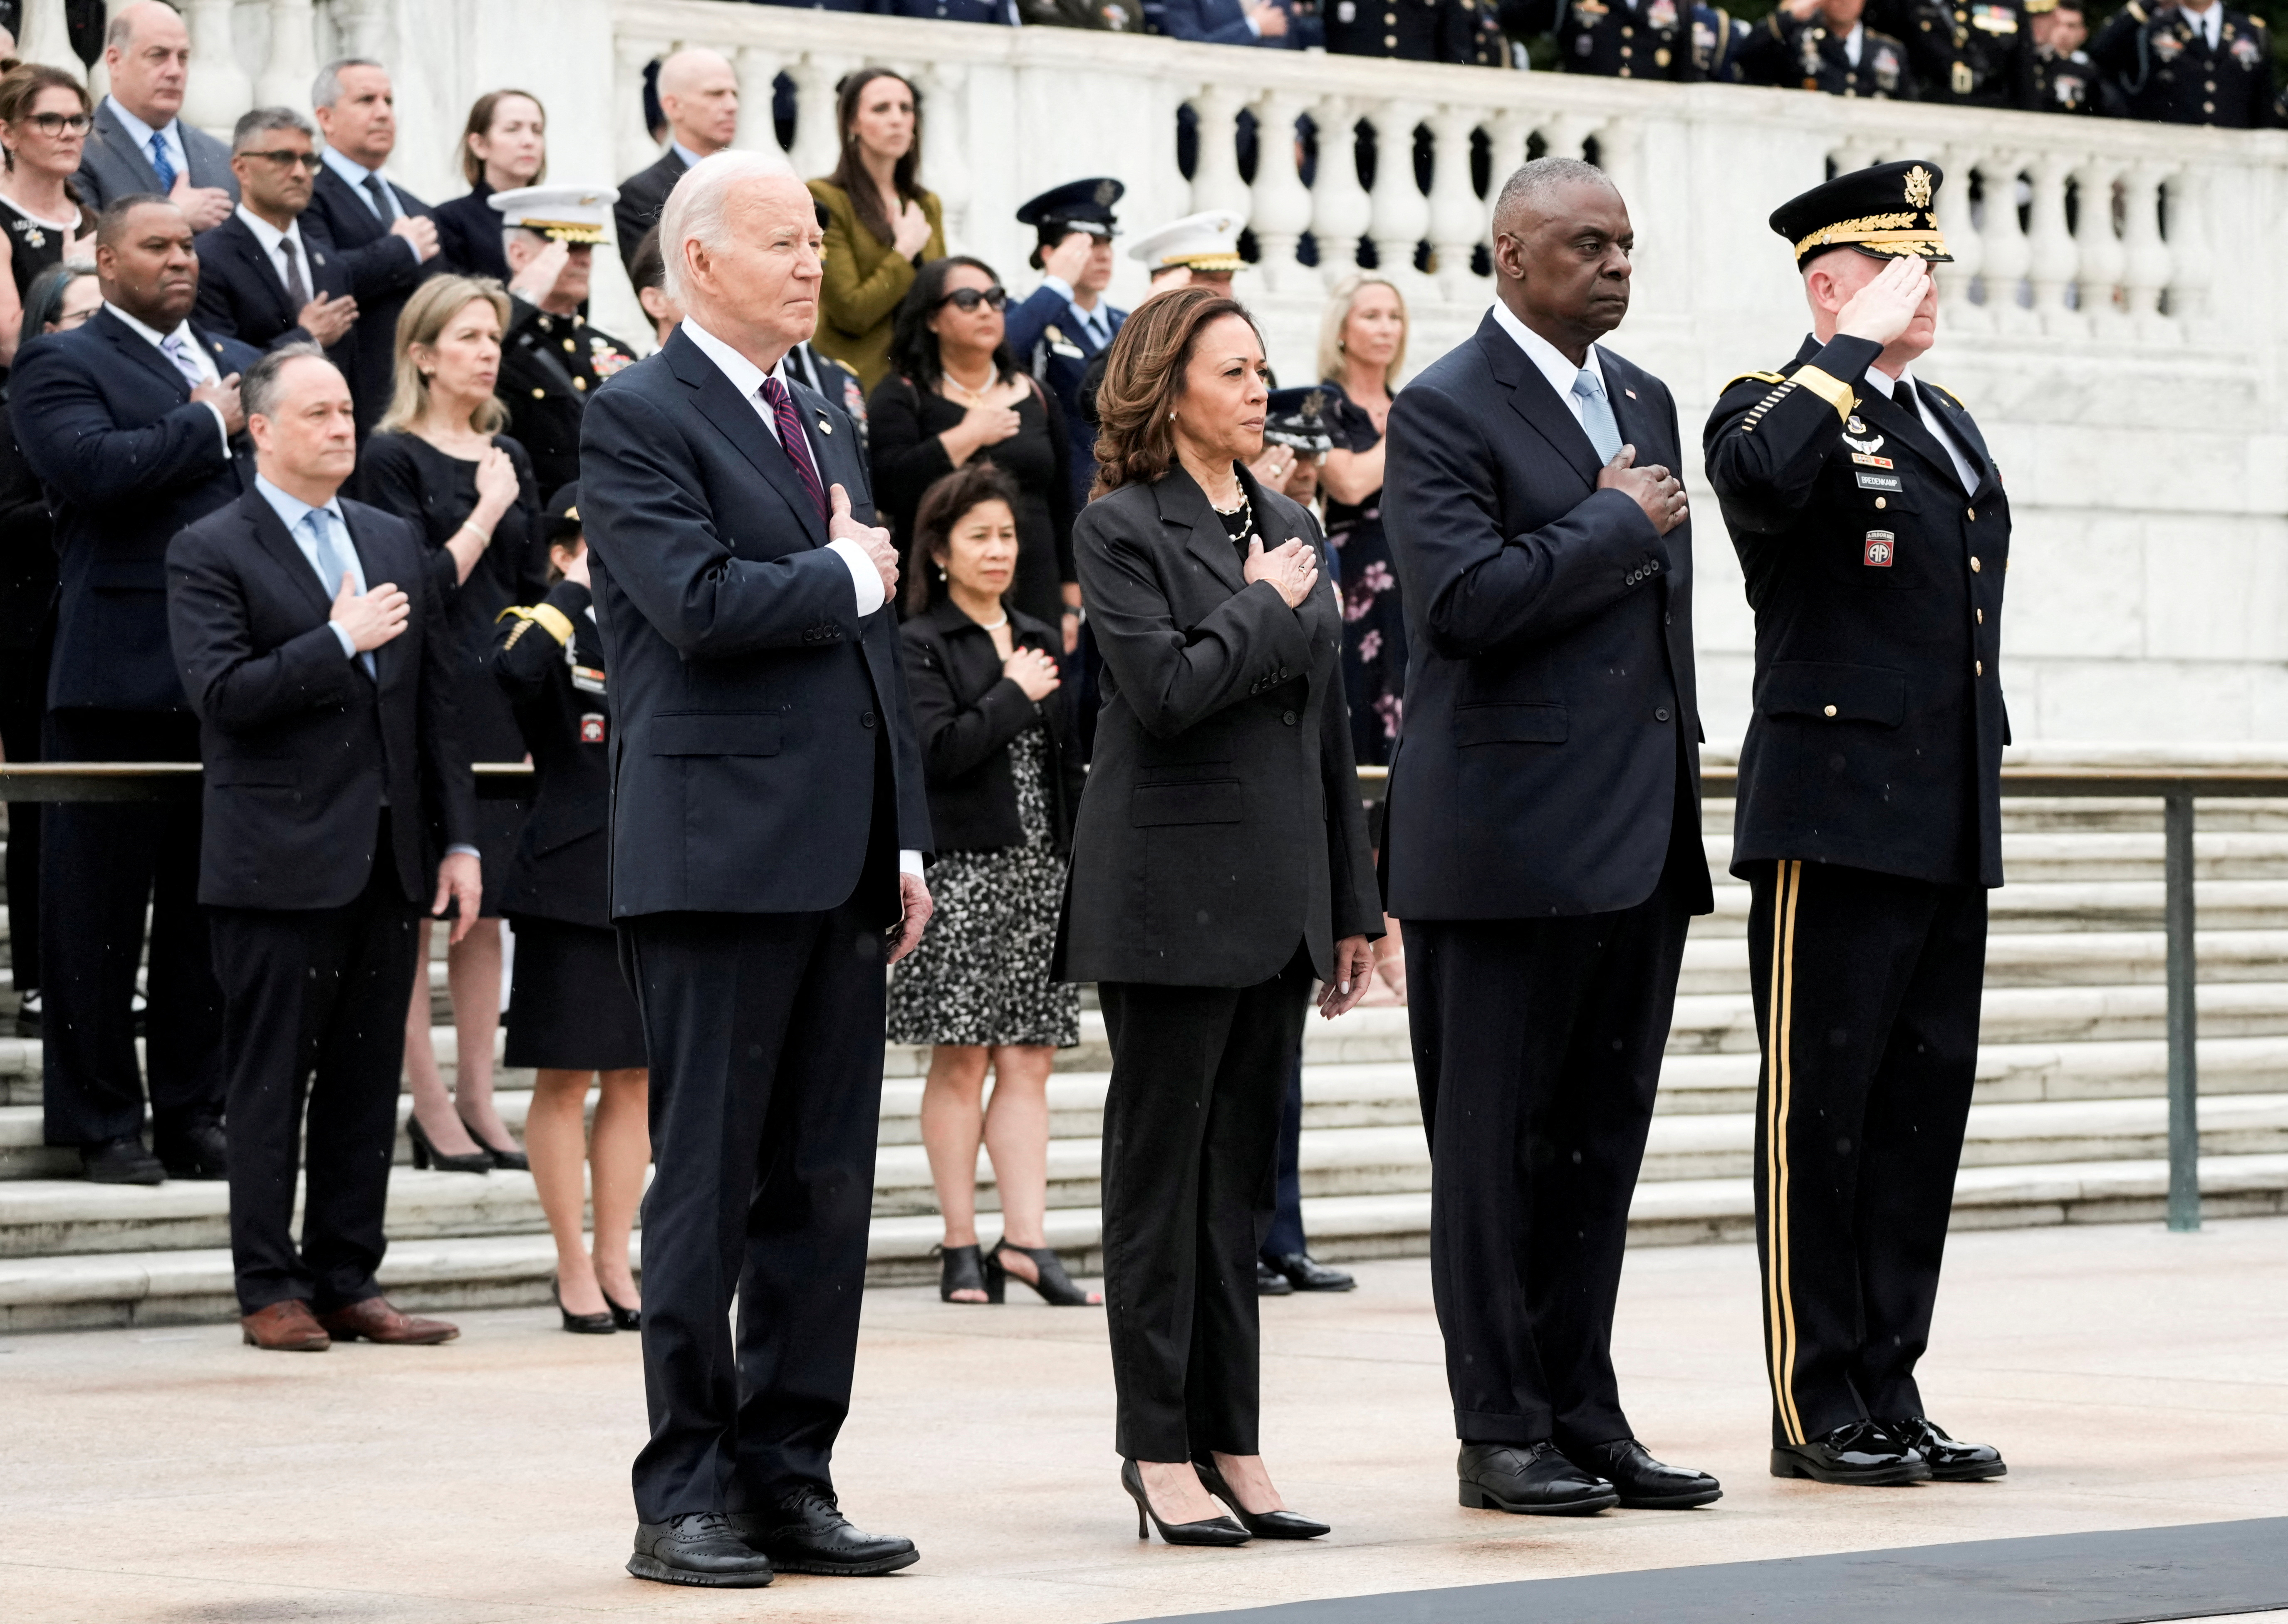 National Memorial Day Wreath-Laying and Observance Ceremony at Arlington National Cemetery, in Washington